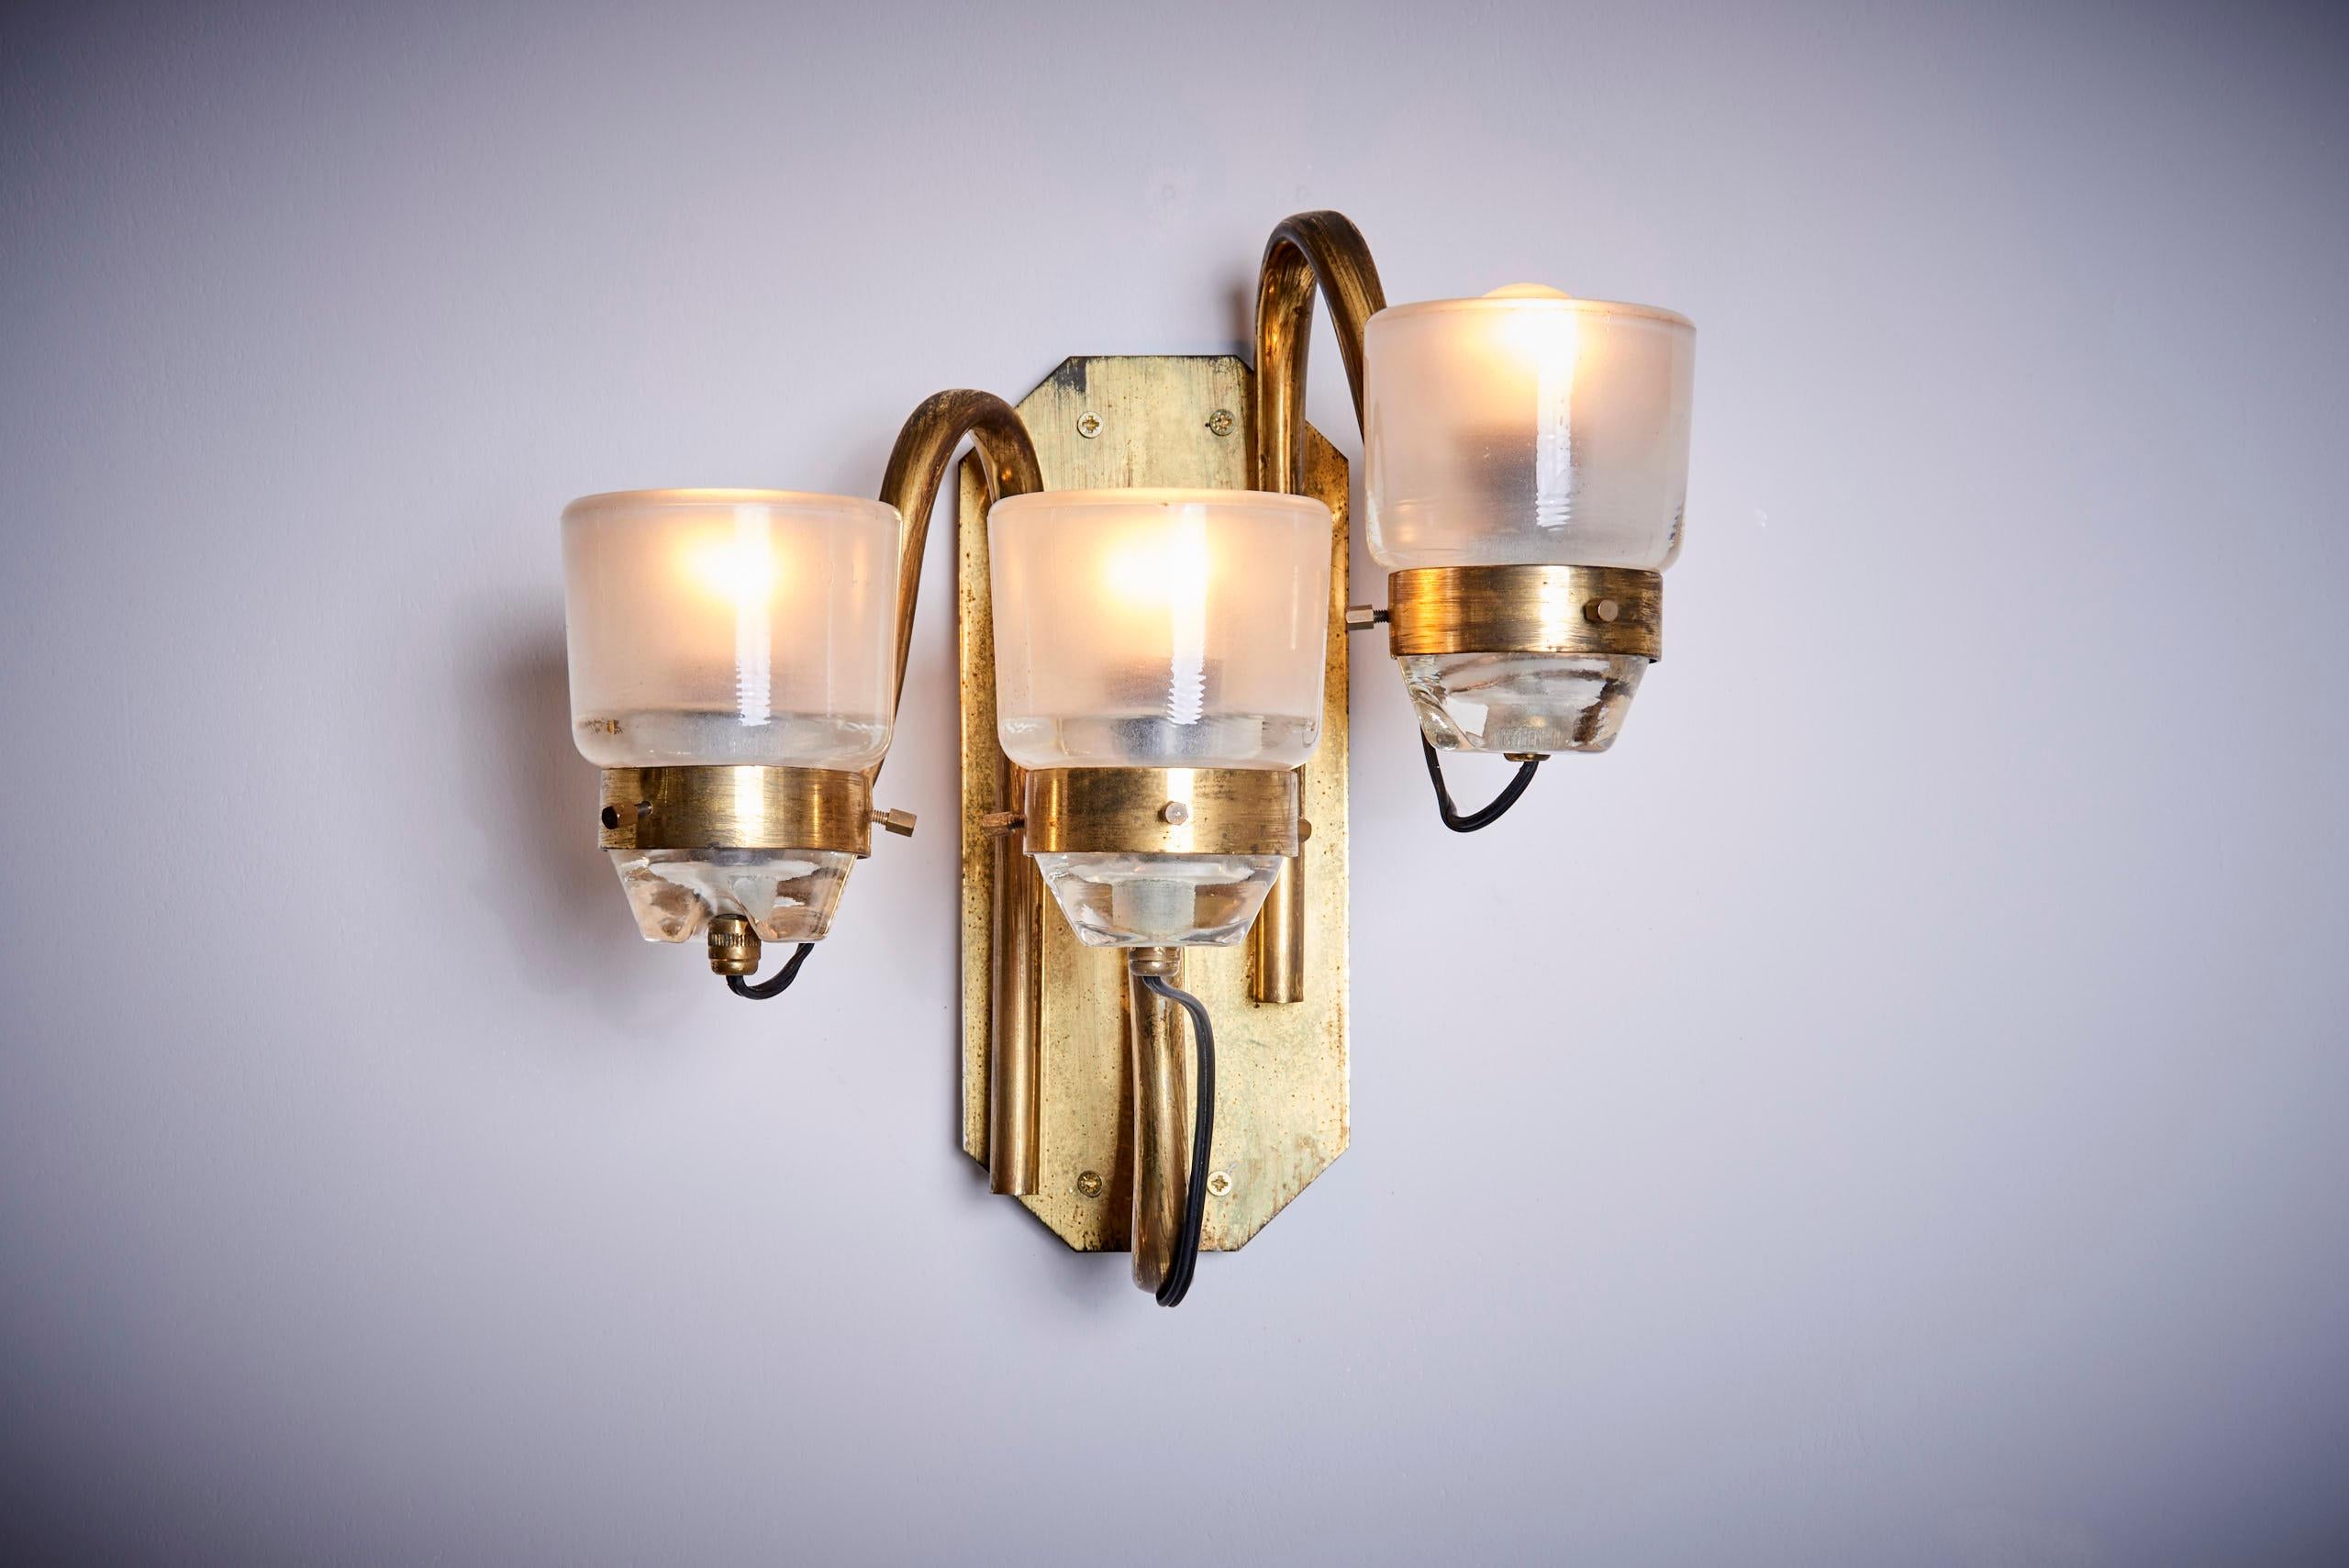 Pair of Marco Zanuso Wall Lamps or Sconces by O-Luce For Sale 2